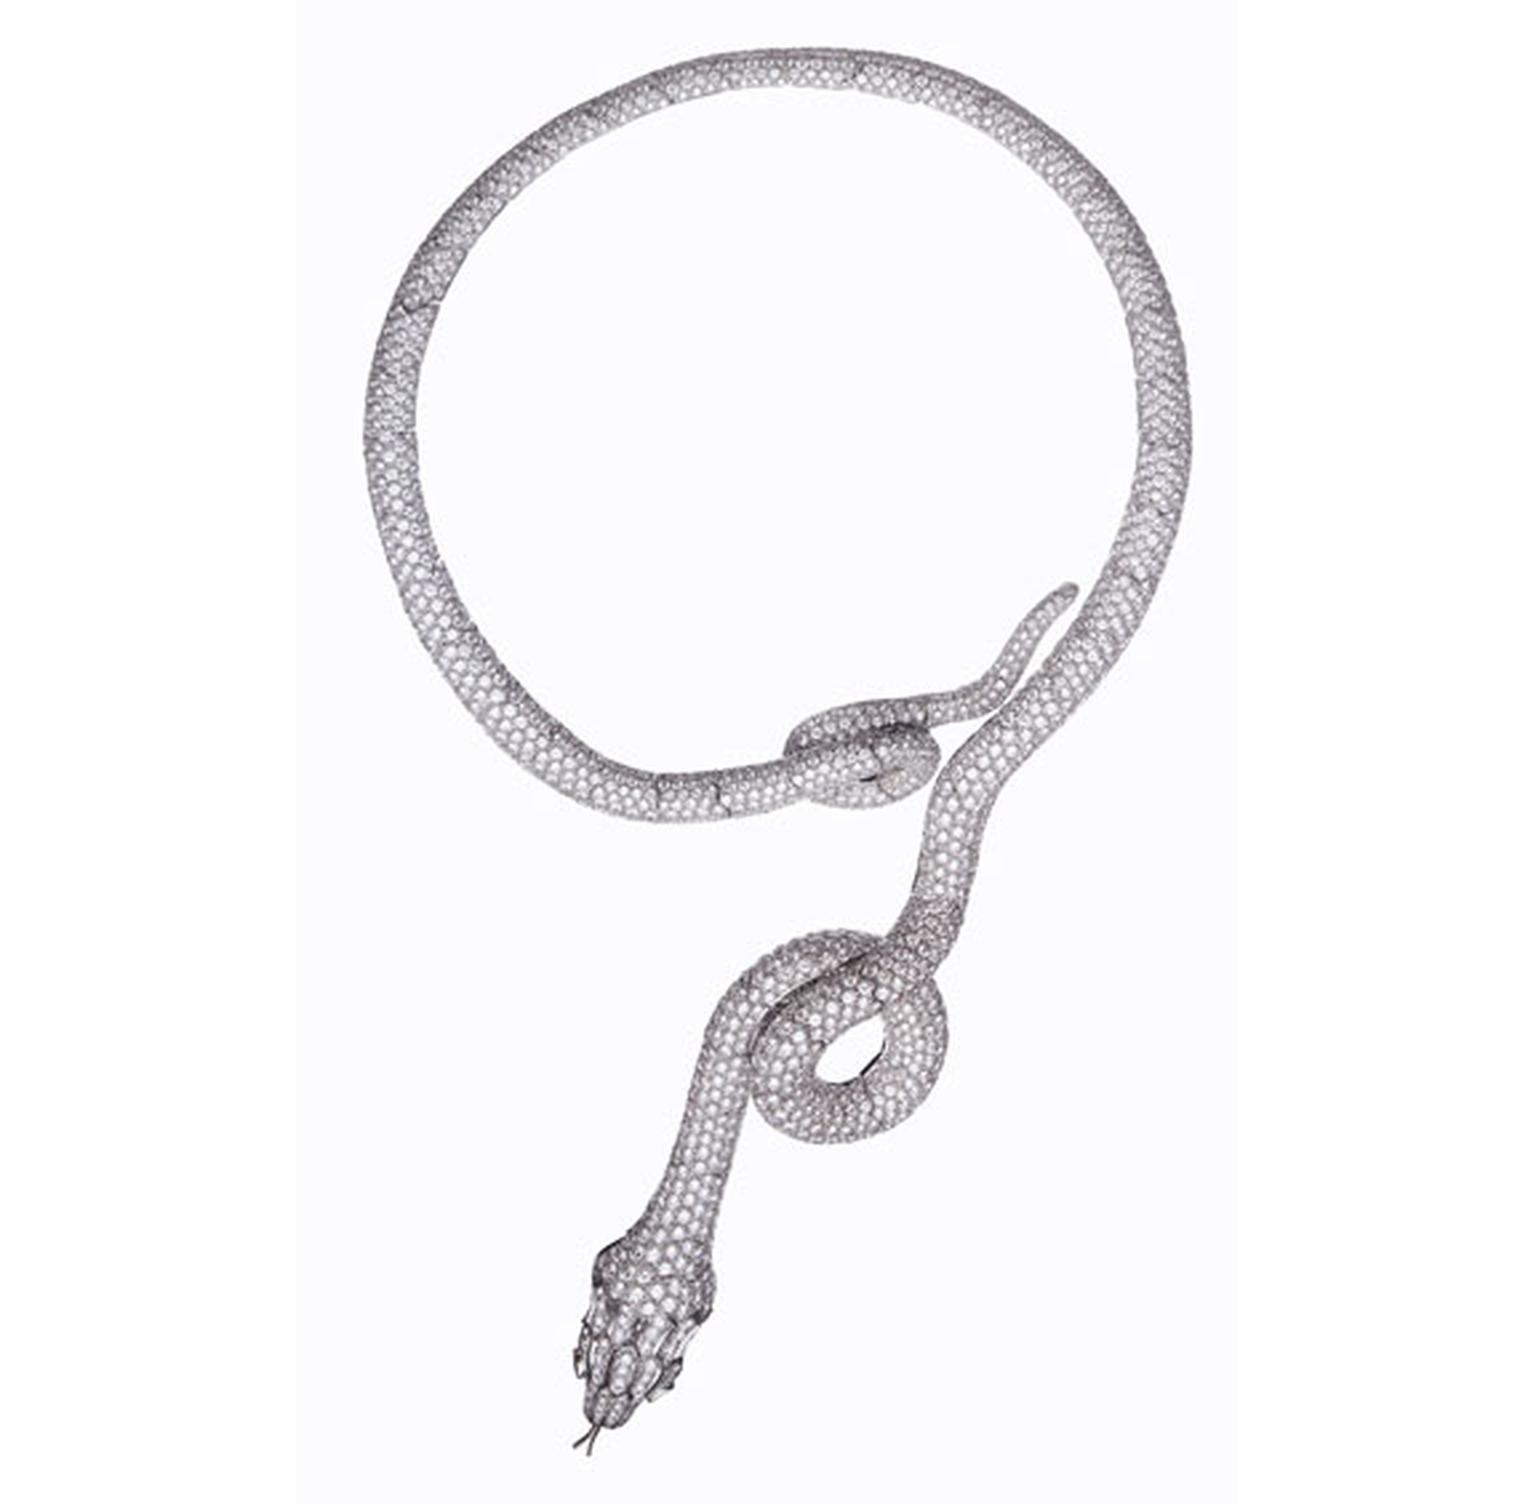 Boucheron's Adam necklace, an iconic jewel from a former collection that features two of the house motifs: the serpent and the shape of a question mark displaying the creativity on show at Biennale.